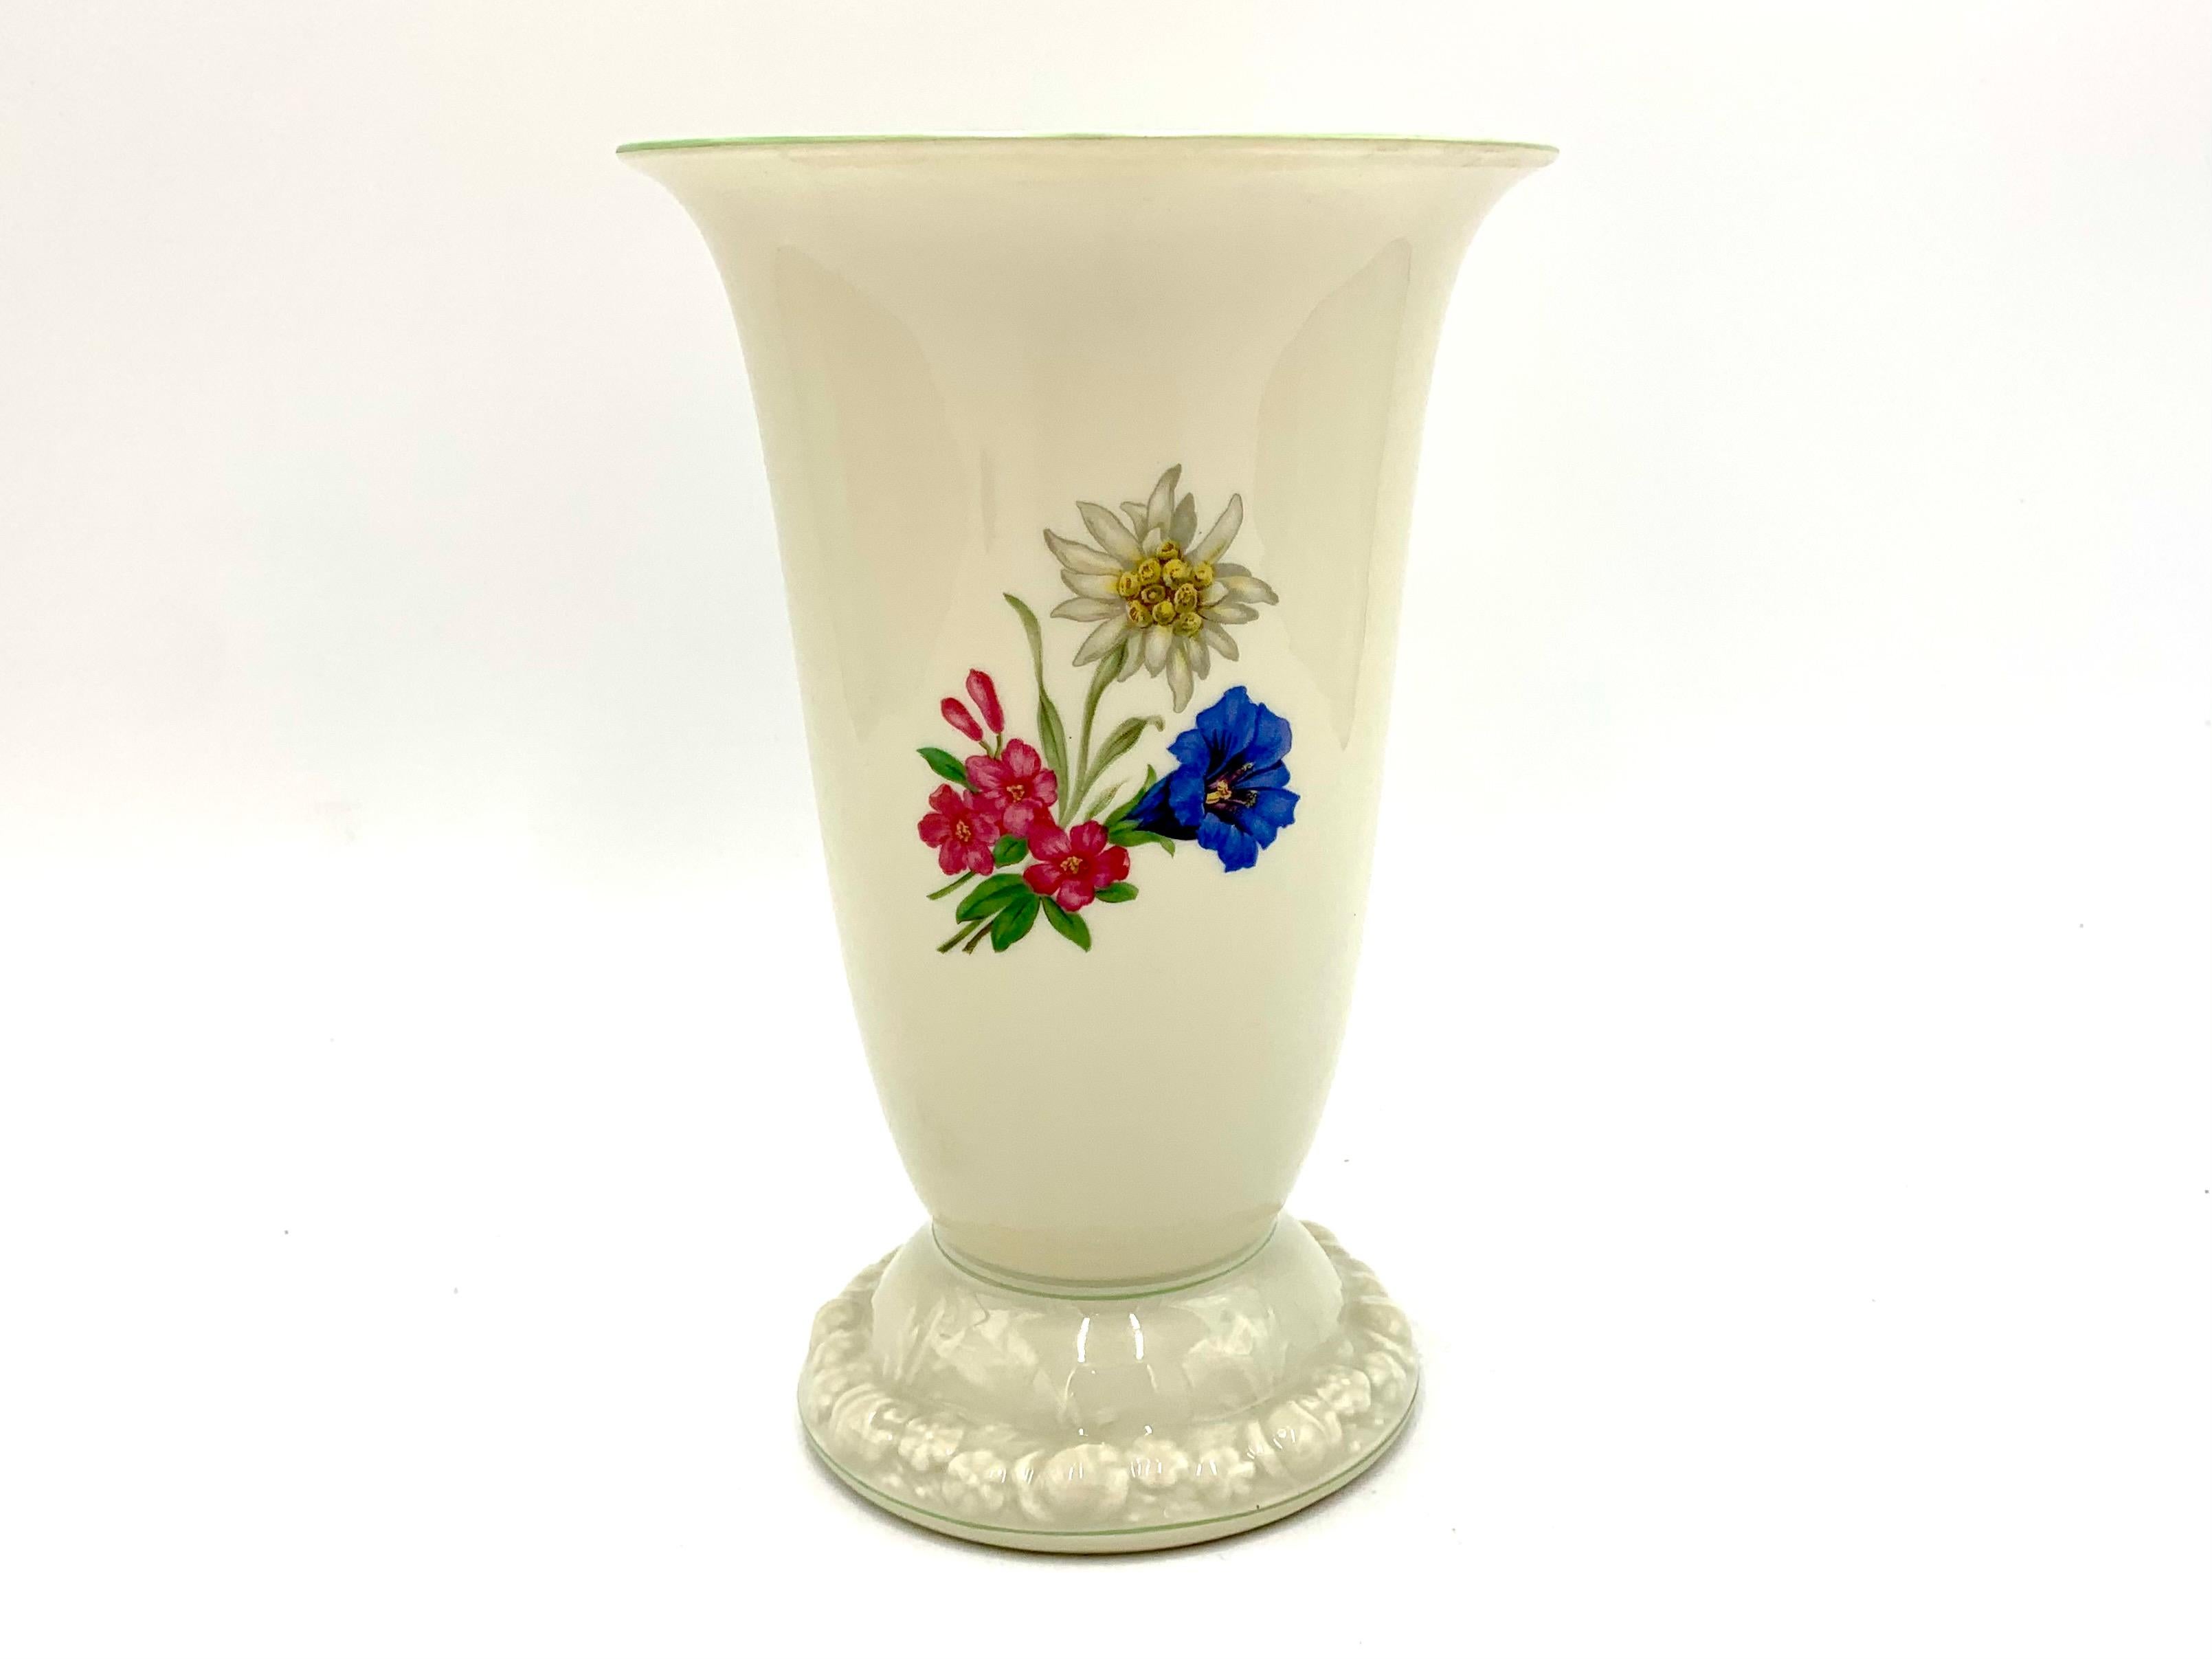 Porcelain vase with a beautiful floral pattern.
Made in Germany in the 1960s.
Signed H & Co. Selb Bavaria Heinrich.
Very good condition, no damage.
Measures: Height 22.5 cm / diameter 15 cm.